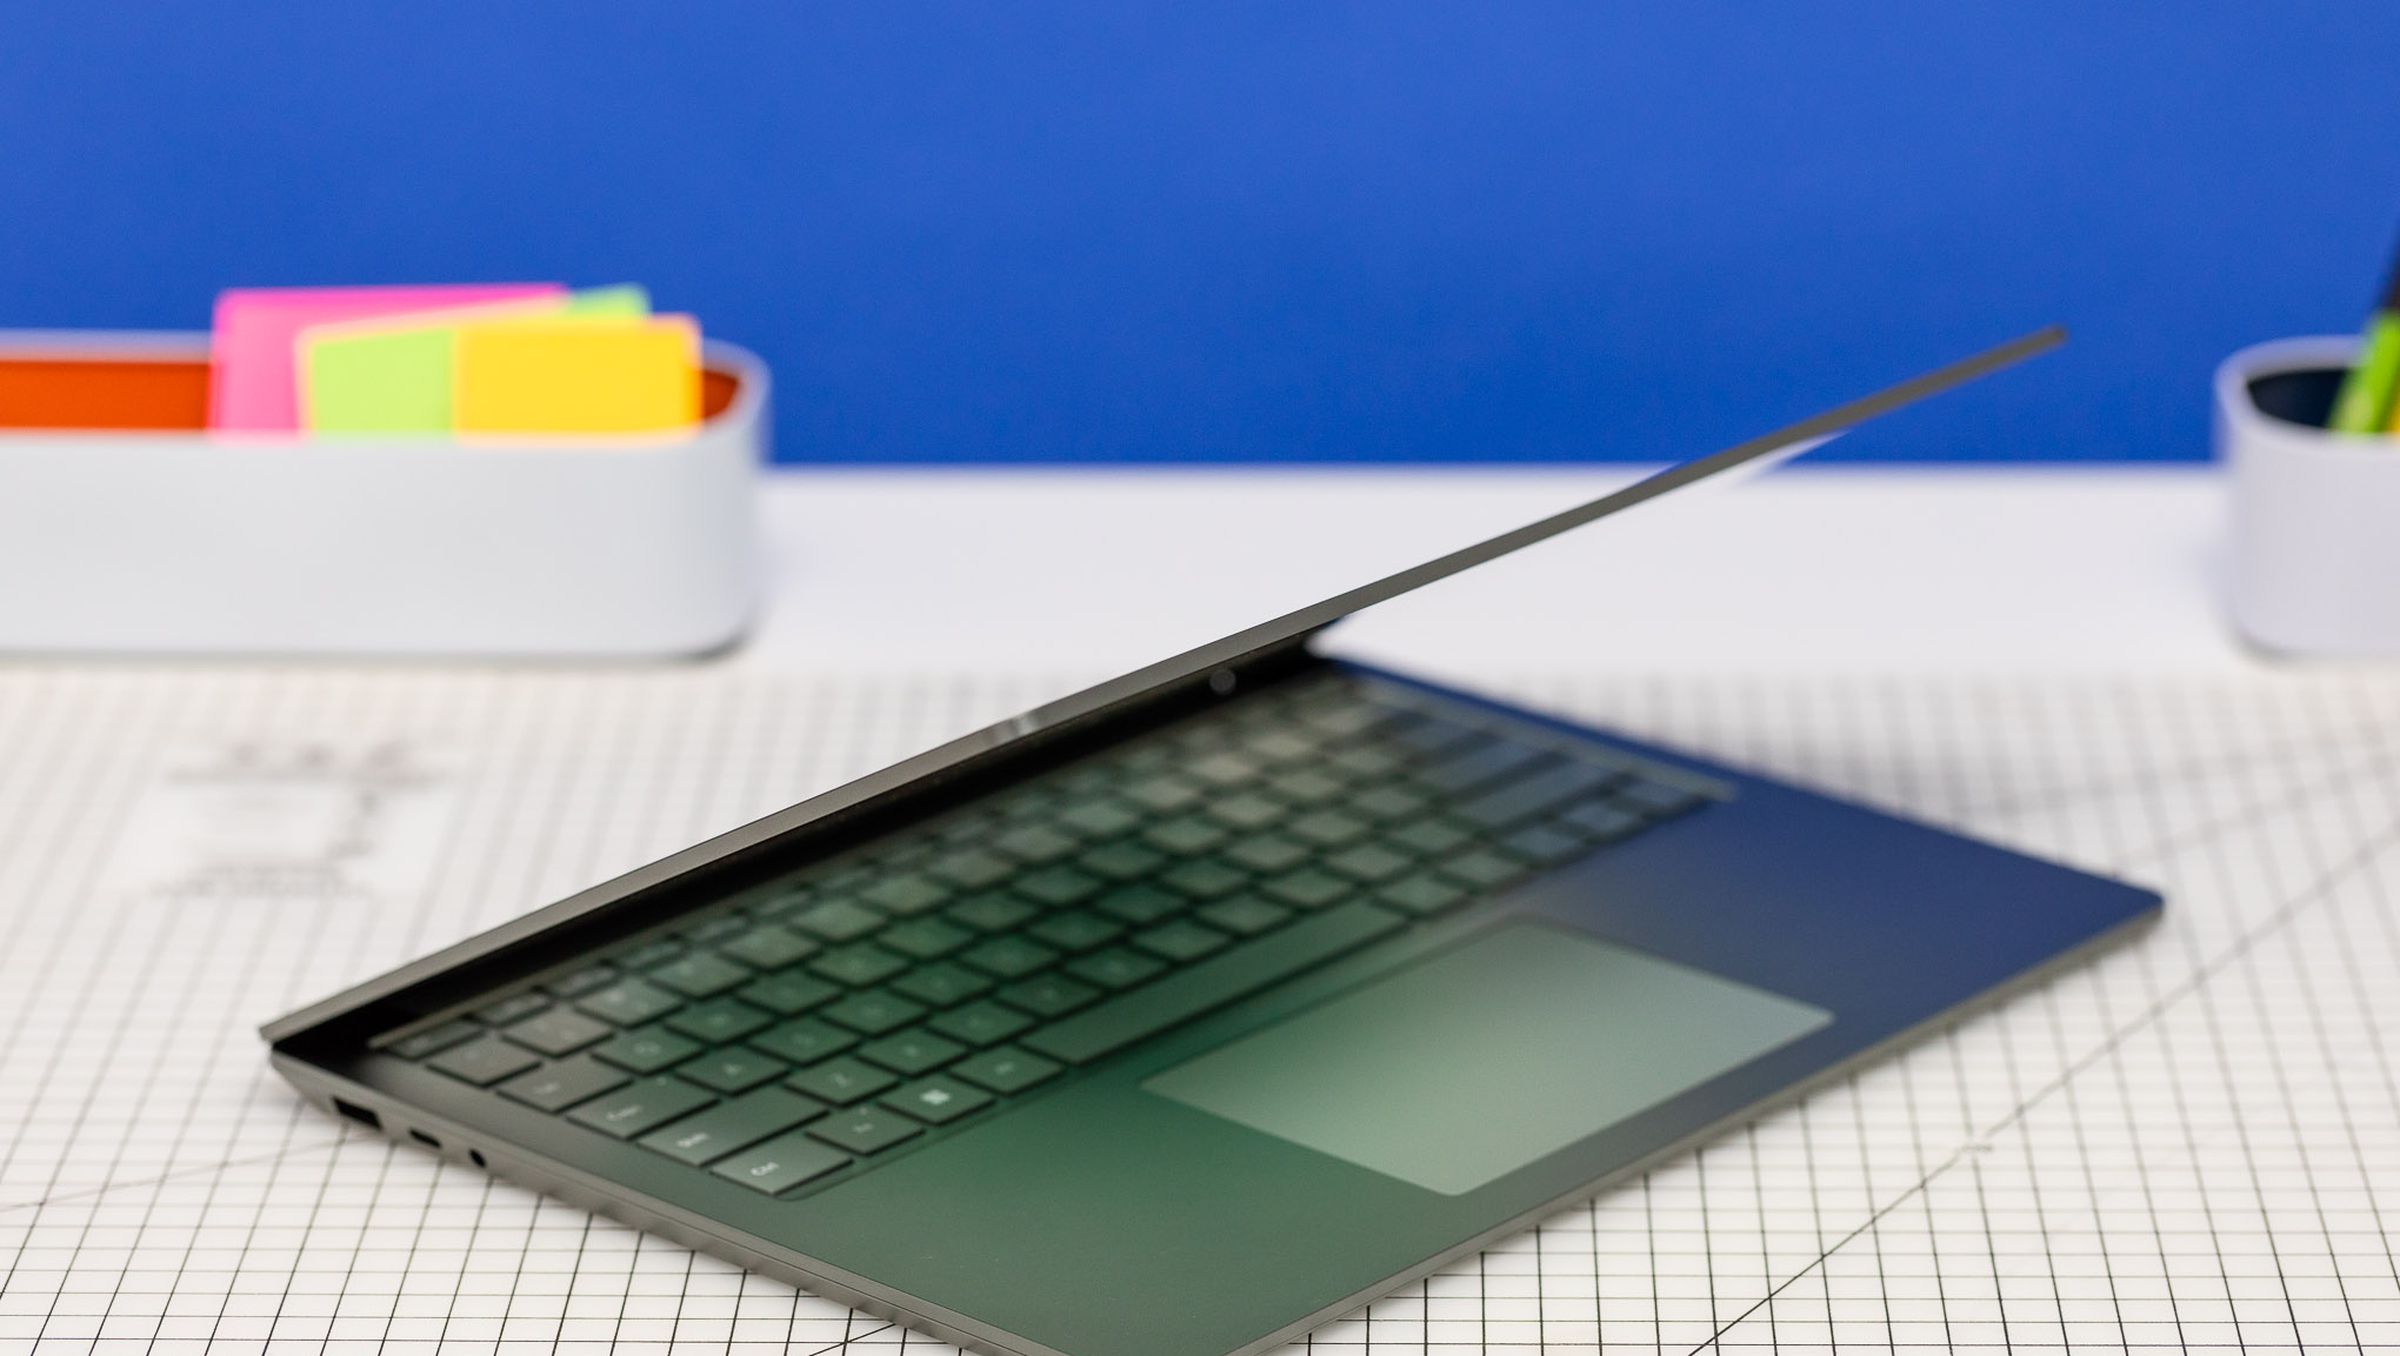 The Surface Laptop 5 half open on a gridded table with post-it notes in the background.